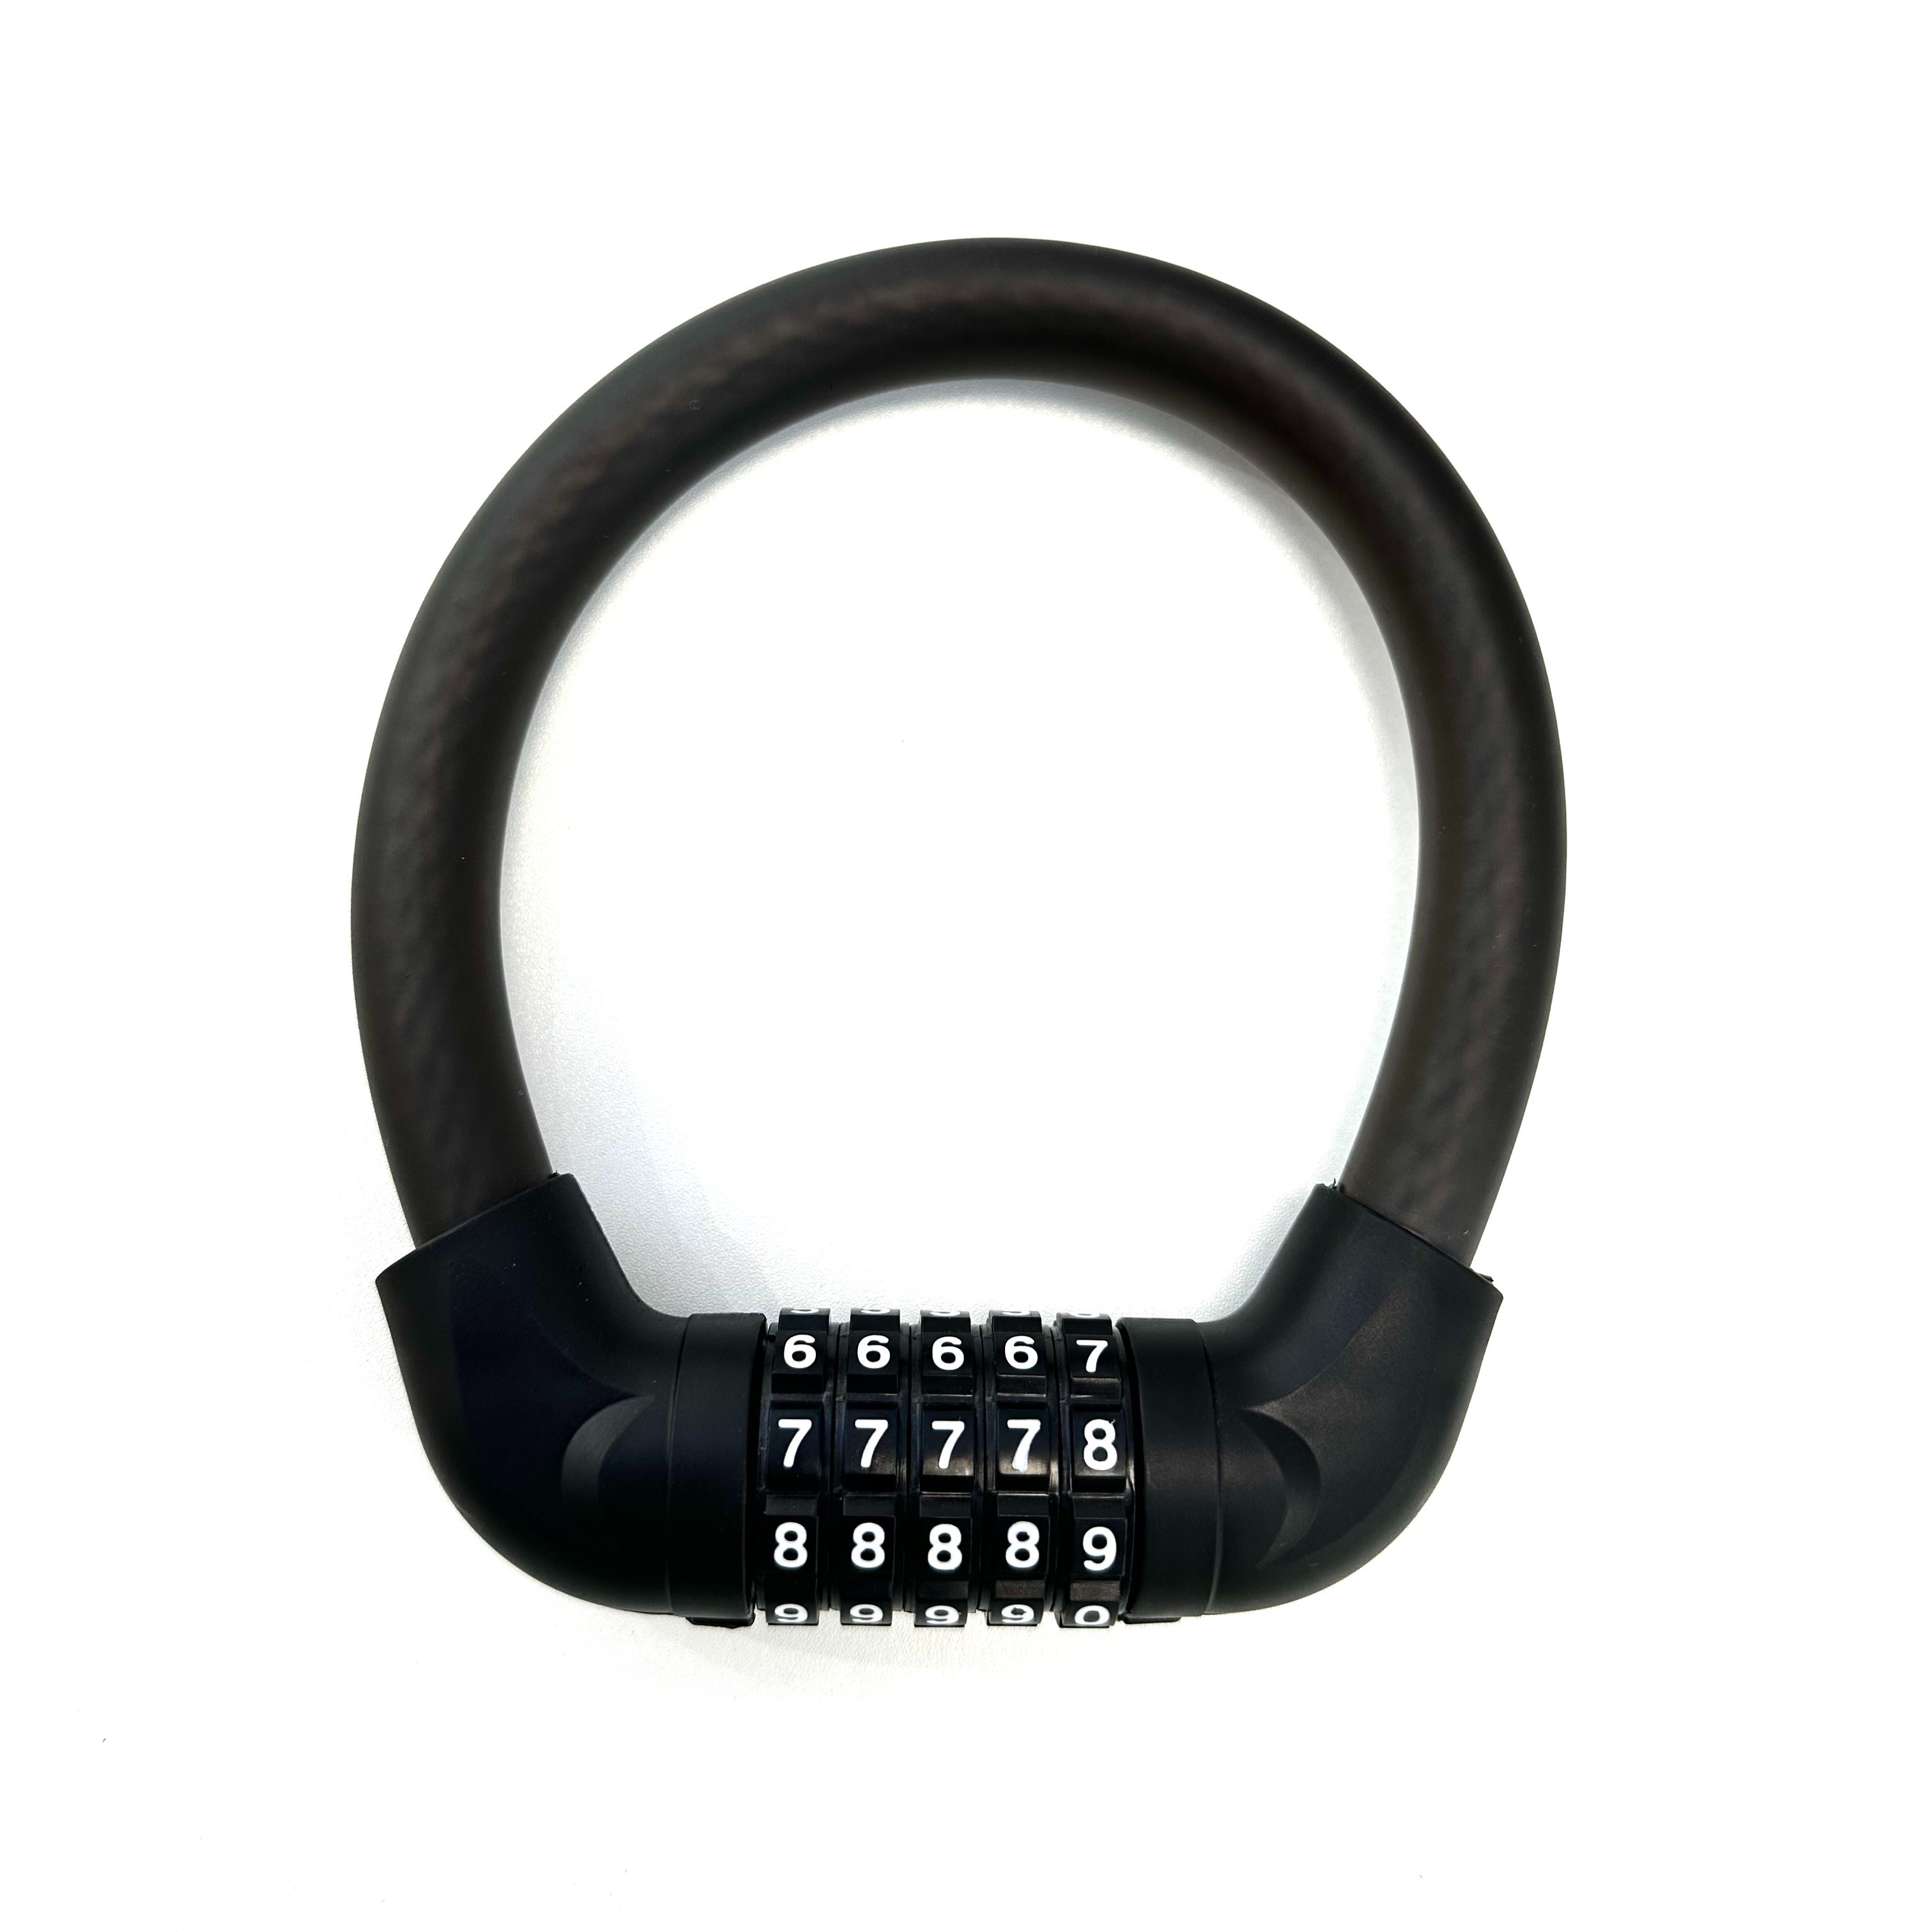 

4-digit Combination Steel Cable Lock, Anti-theft Security, 45cm Overall Length, 12mm Thick Cable, For Bicycle/bike Safety, Durable Pvc & Zinc Material, Universal Fit